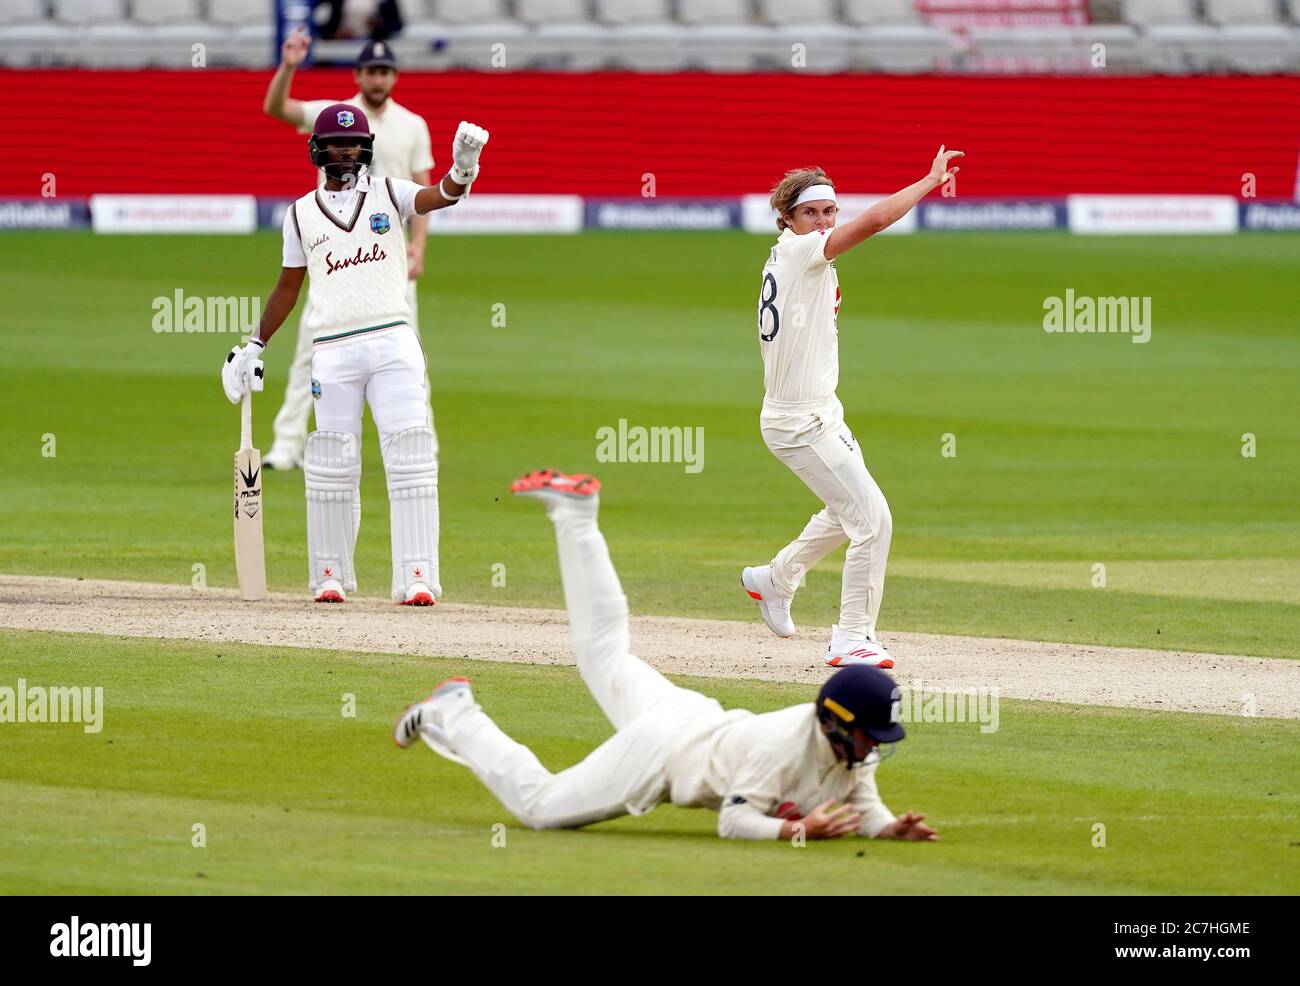 England’s Sam Curran appeals for the wicket of West Indies’ Alzarri Joseph during day two of the Second Test at Old Trafford, Manchester. Stock Photo